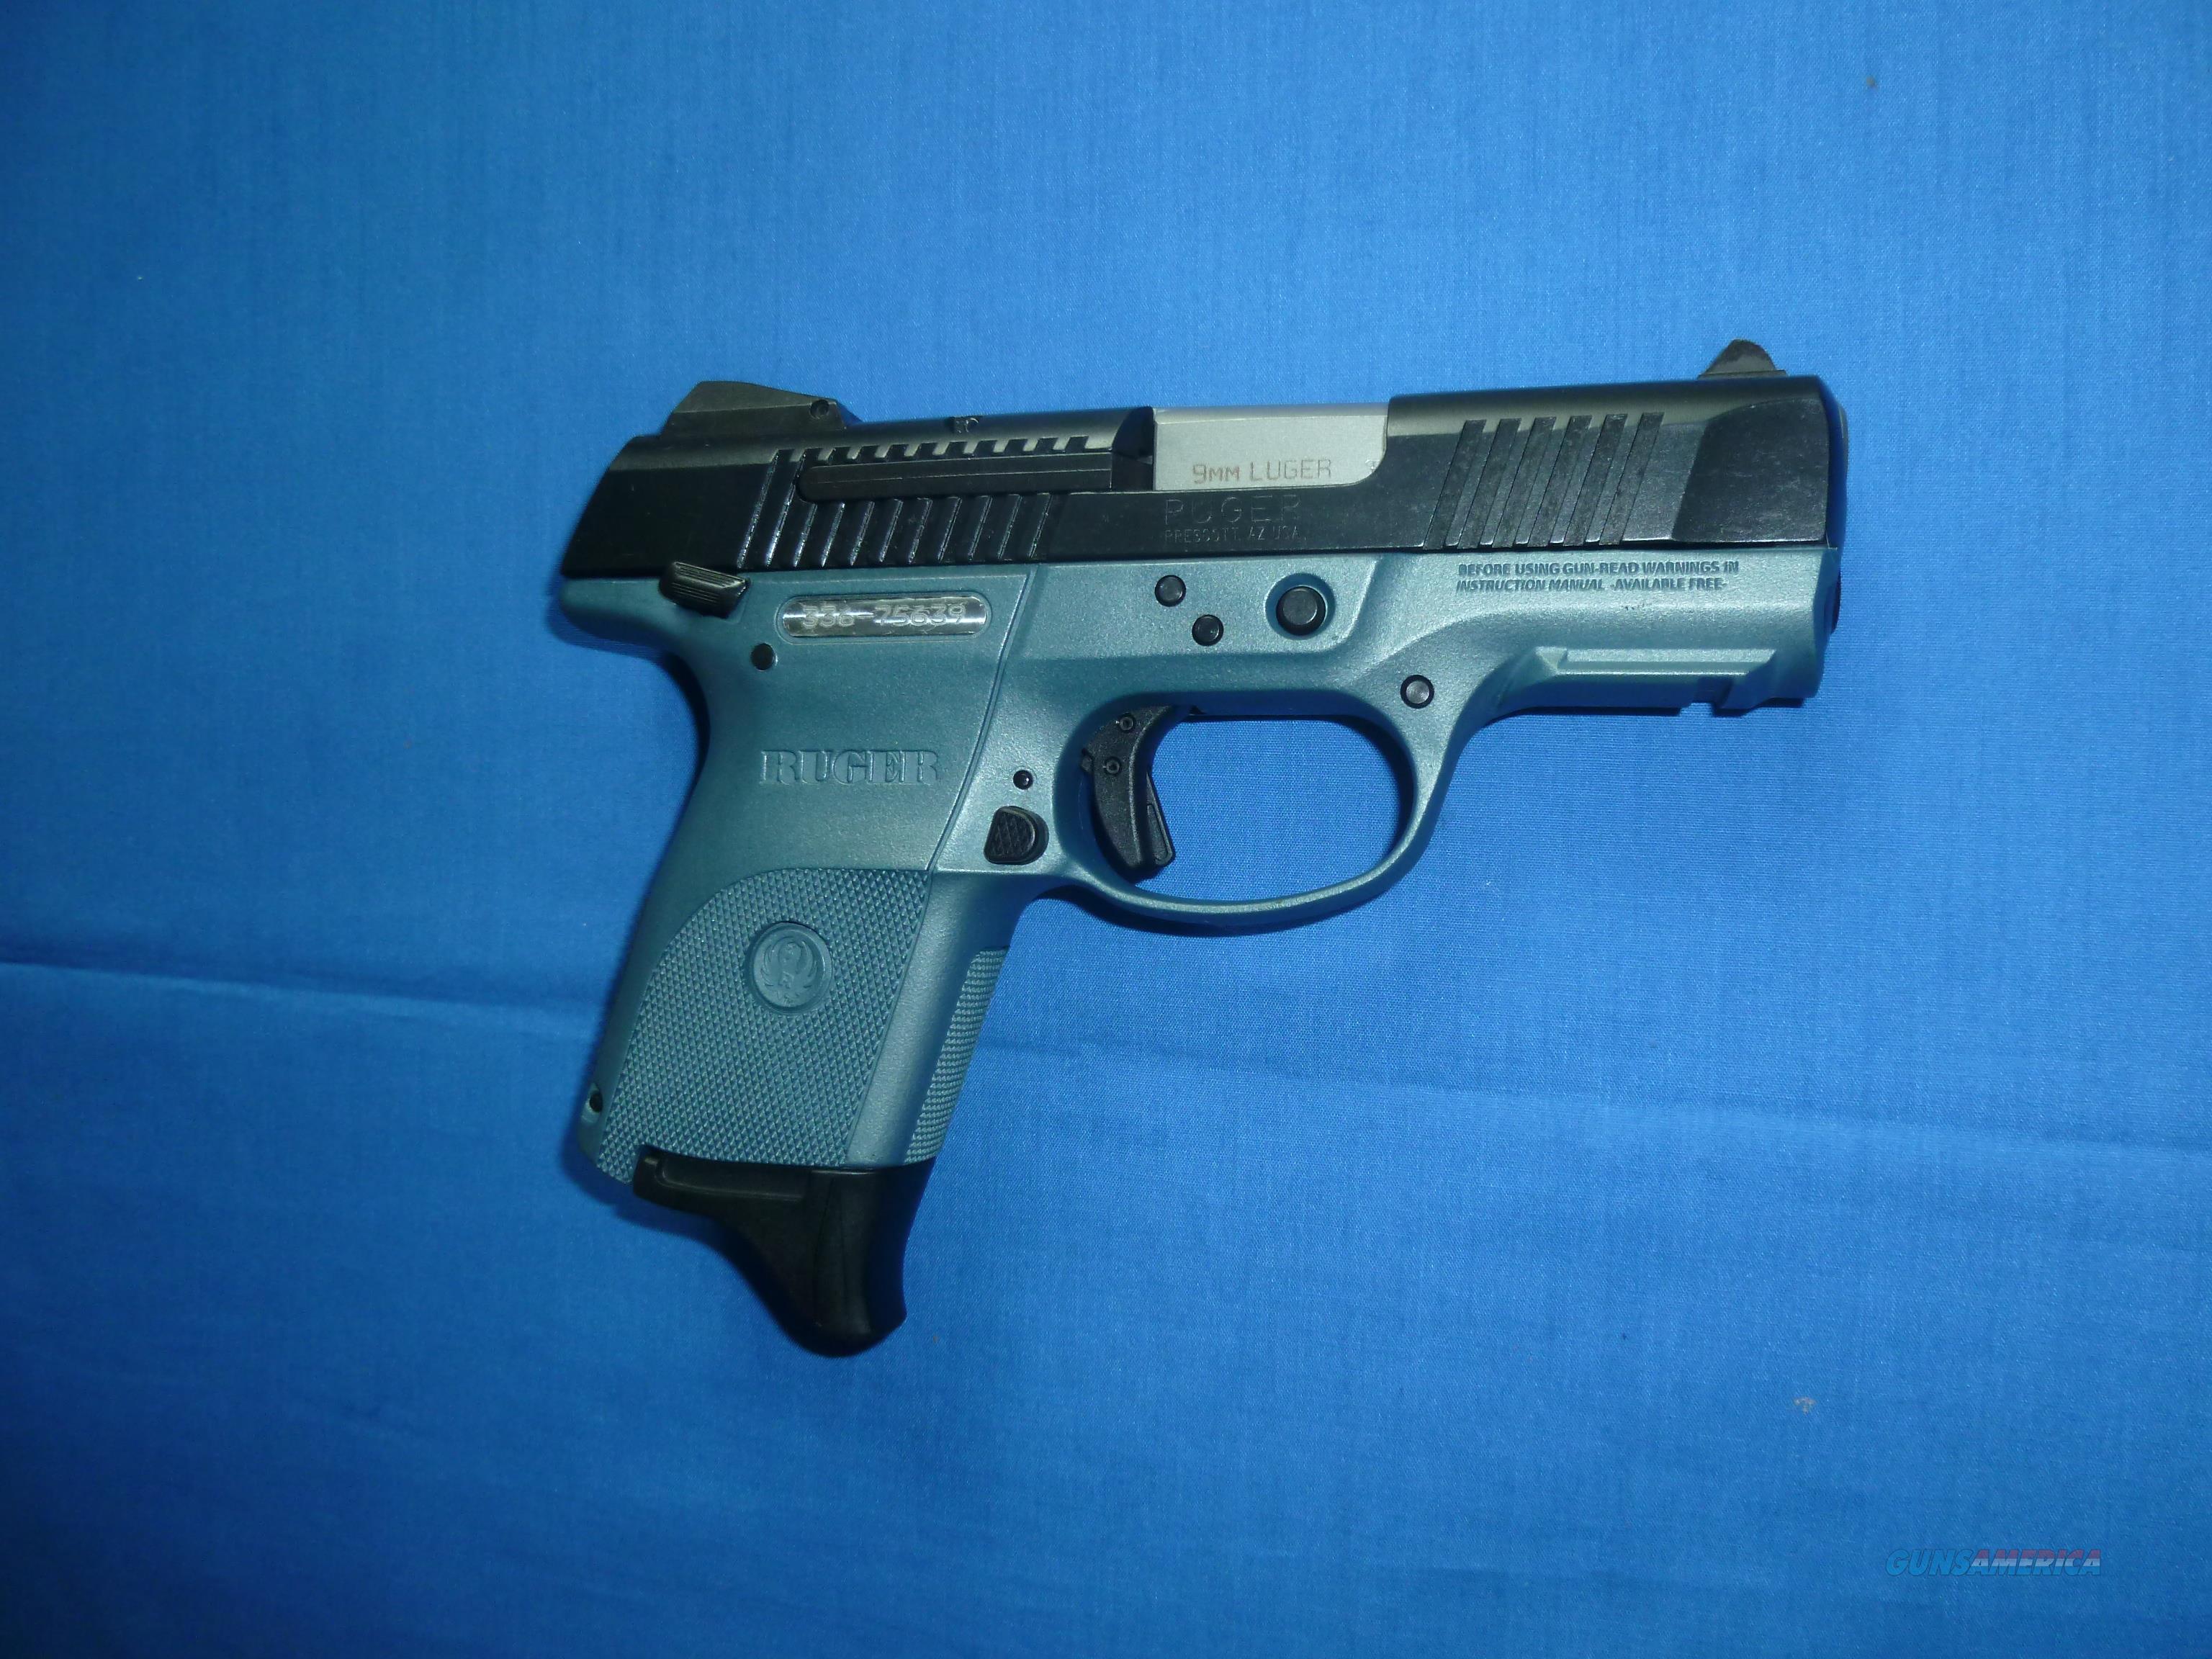 Sale Priced Ruger Sr9c 9mm Compact Pistol W For Sale